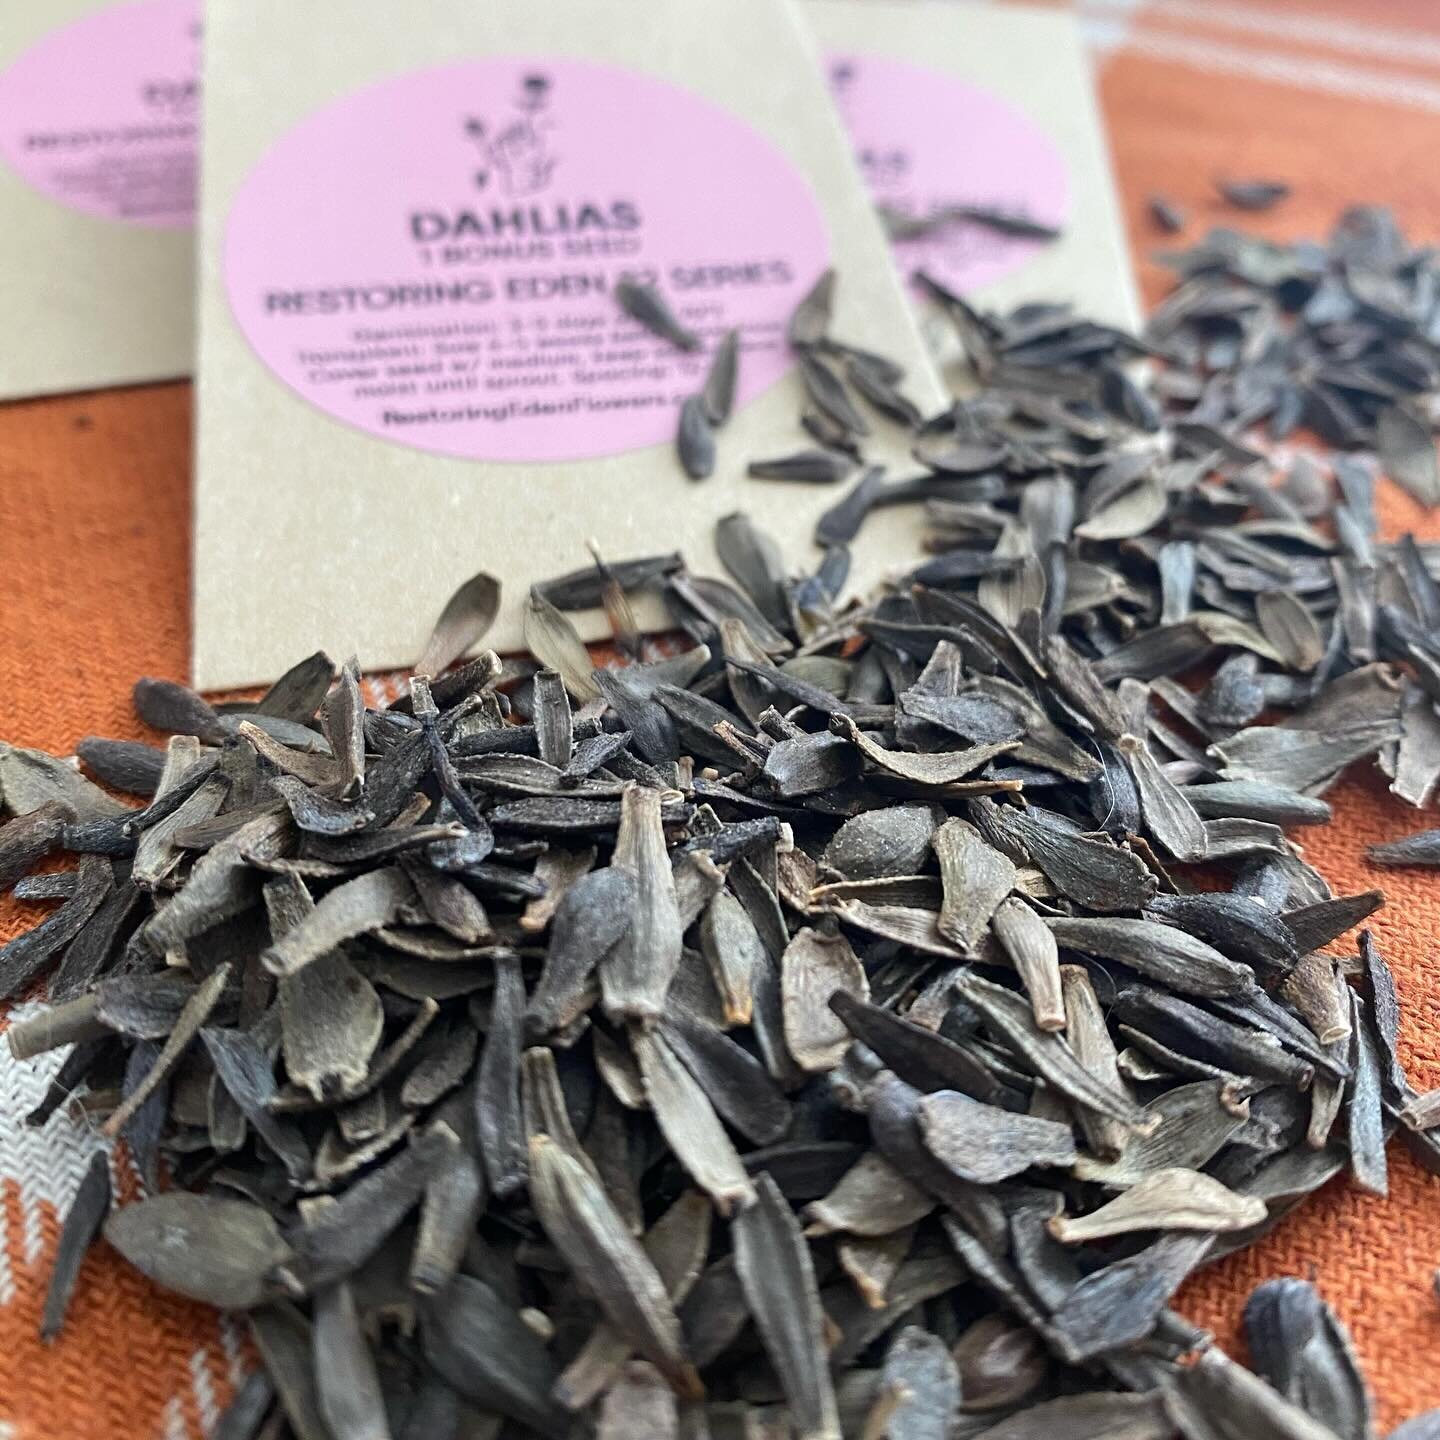 It's my third year collecting and growing seeds from my dahlia patch here at Restoring Eden, and I've decided to make my supply available now rather than wait until Spring. All hand separated and evaluated by yours truly ;) link in bio, if interested